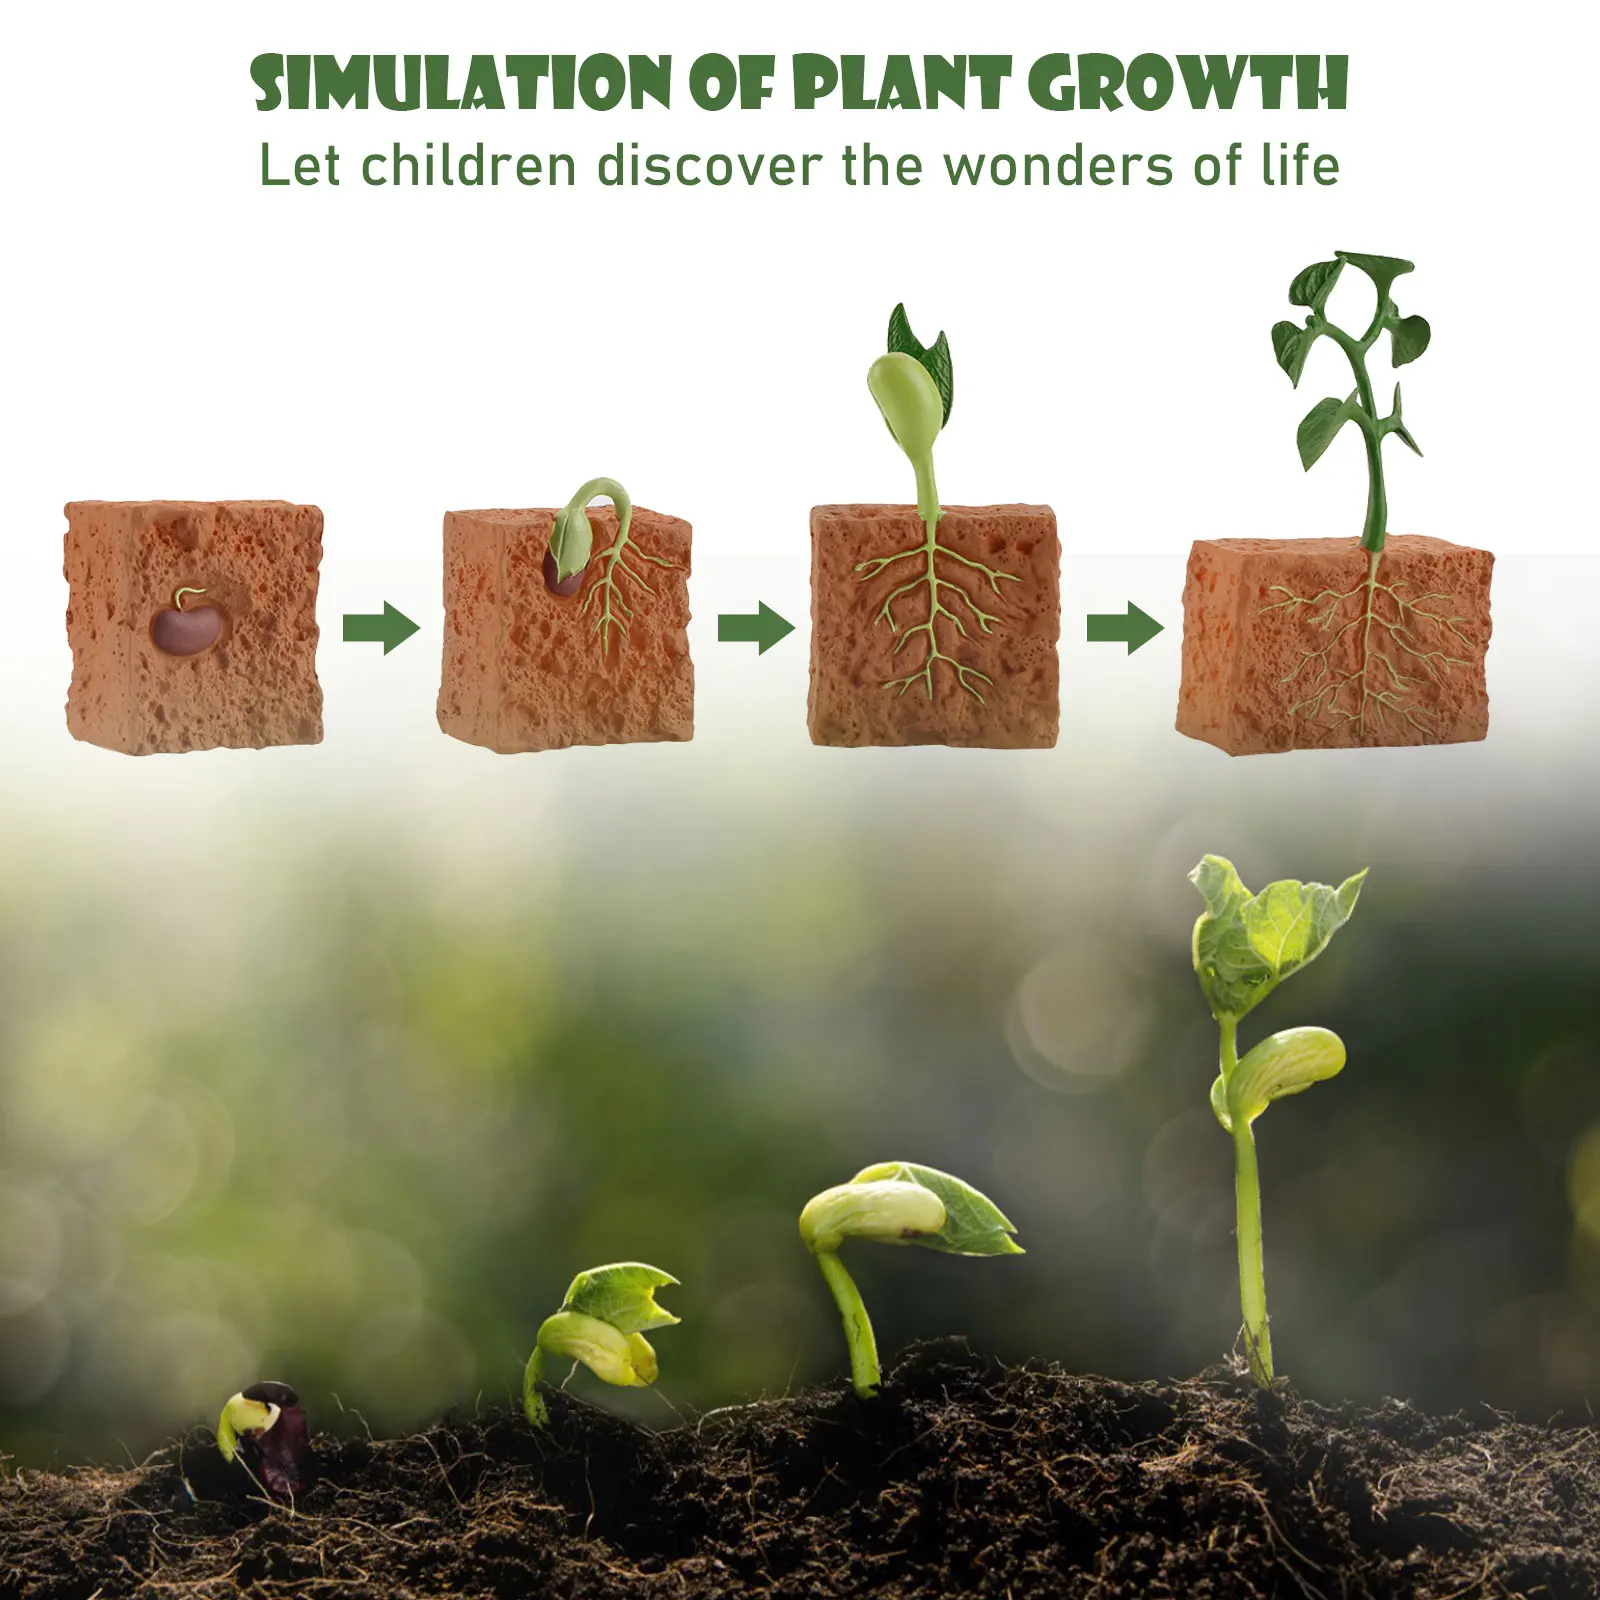 Details about   4 Pcs Simulation Plant Growth Life Cycle Model Kids Educational Toys 